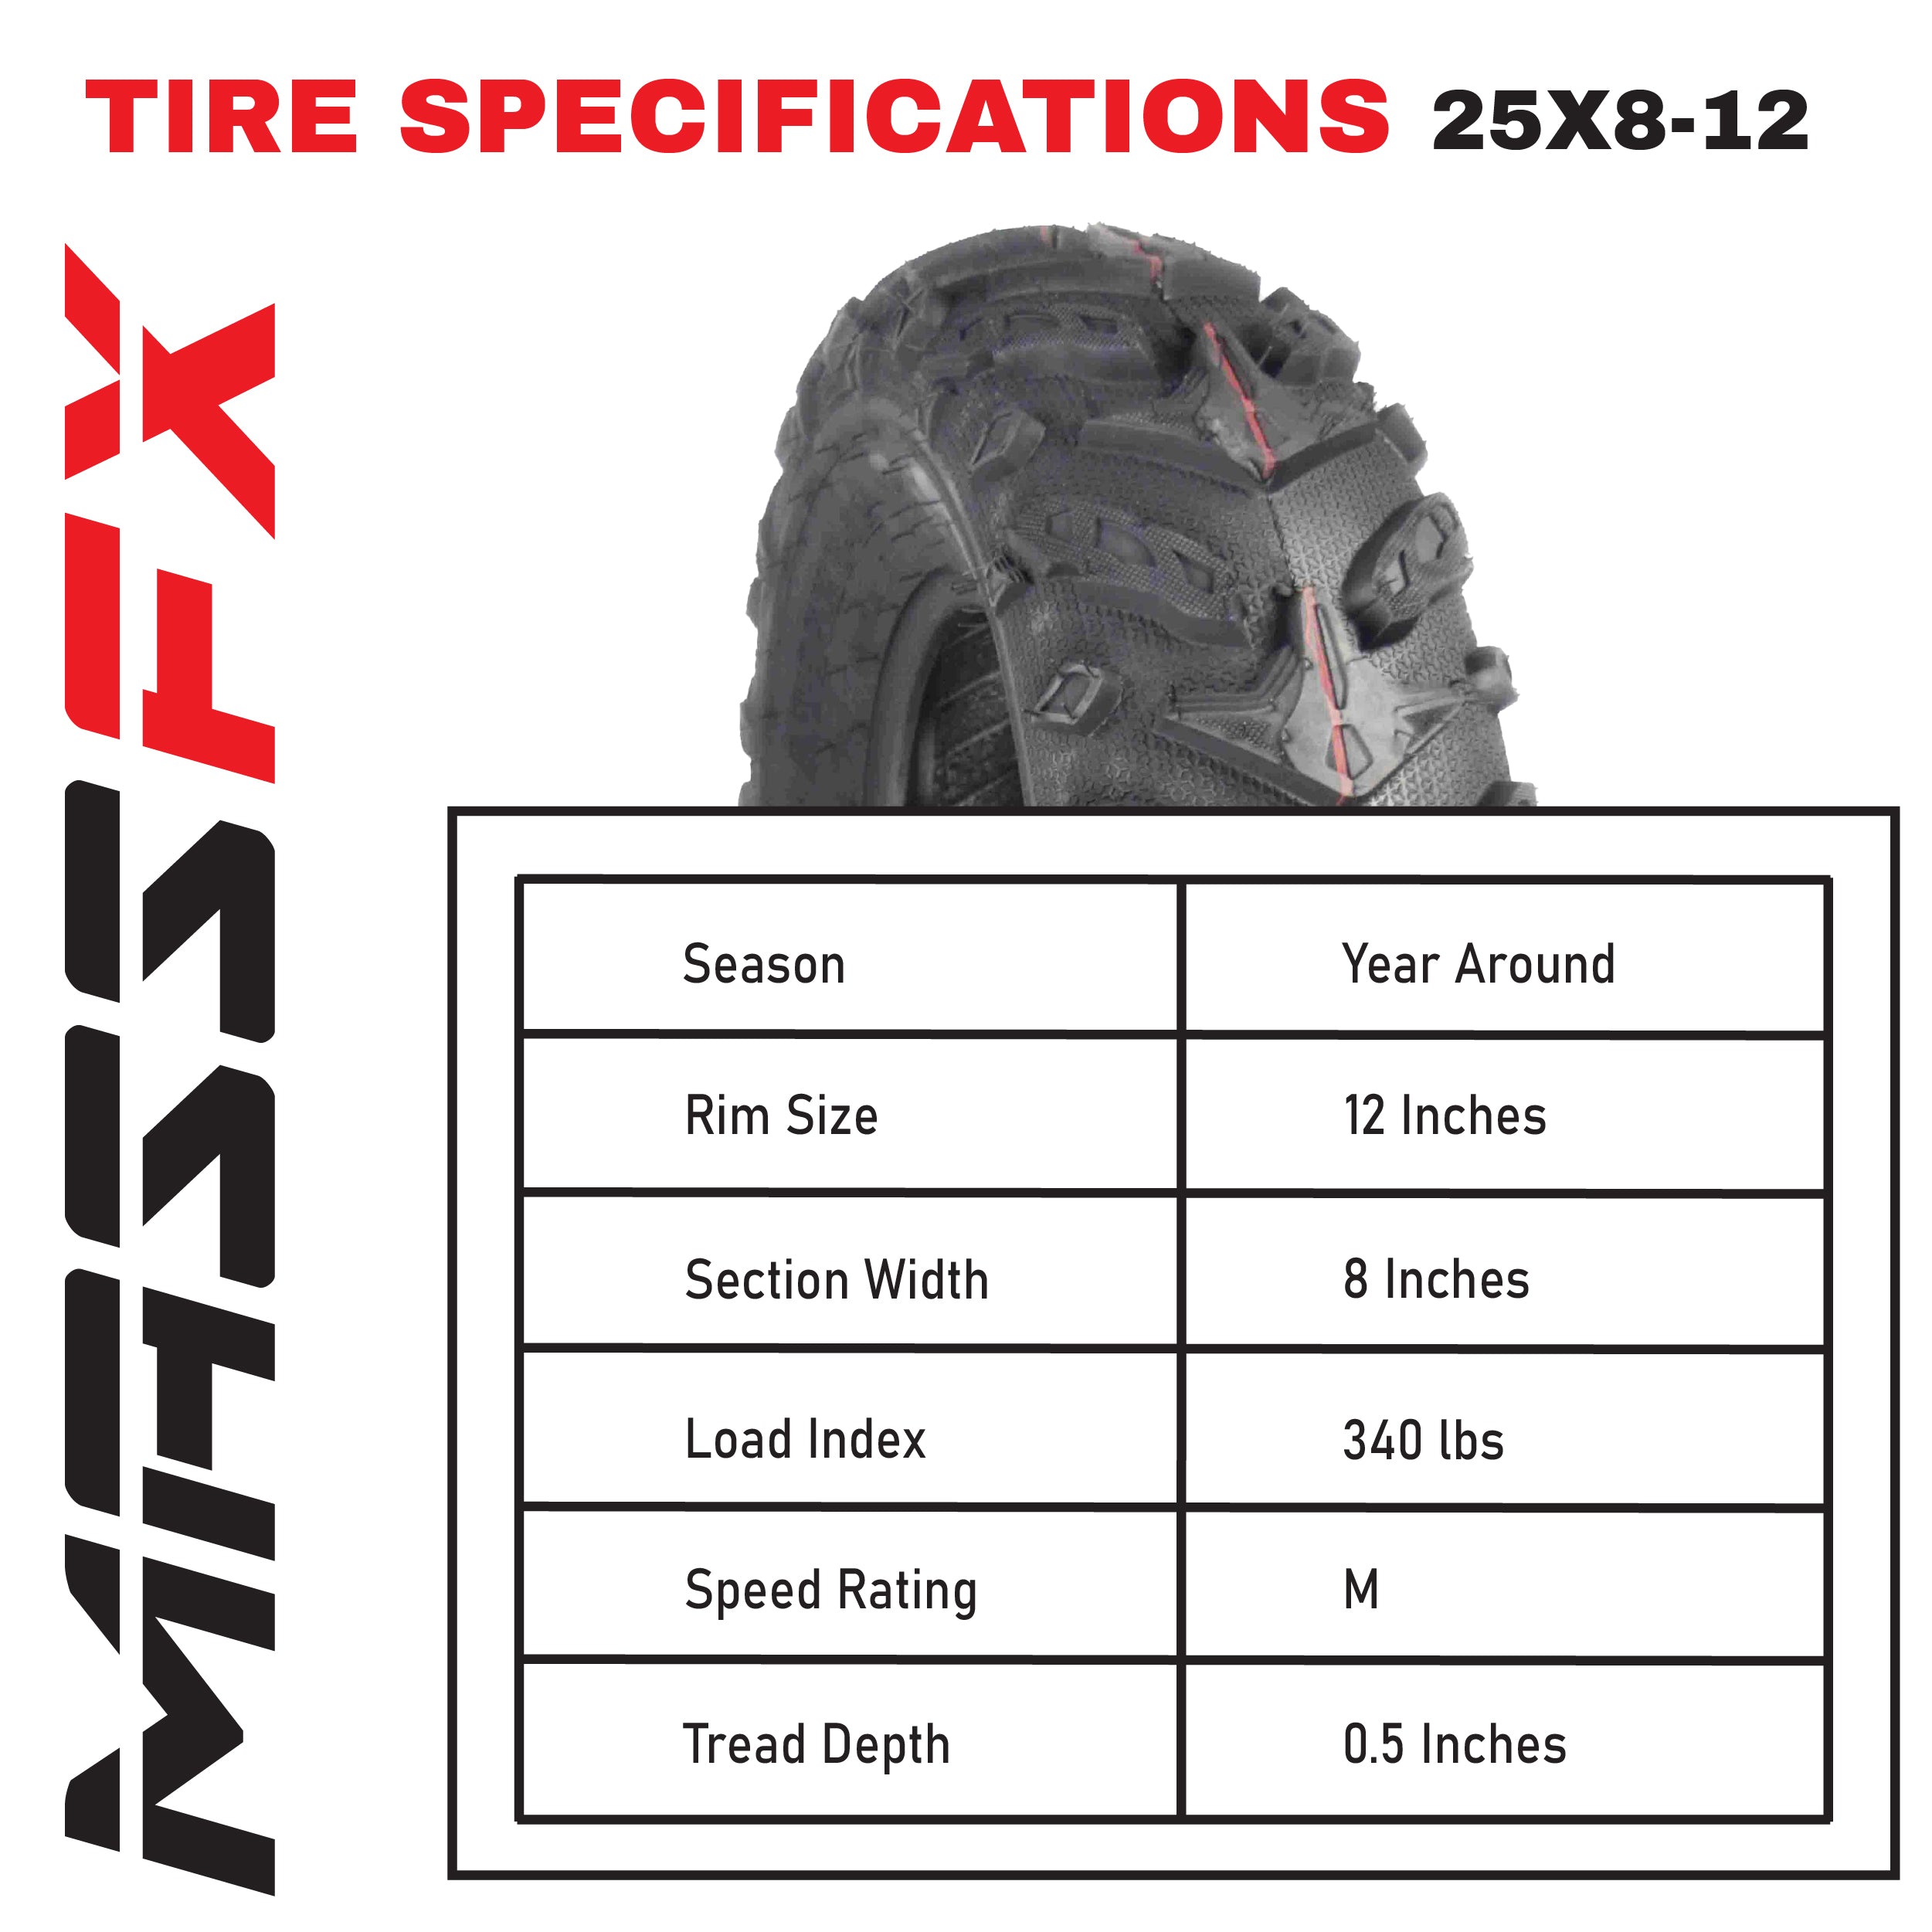 MASSFX Grinder 25x8-12 Front ATV Tire 6 Ply for Soft/Hard Pack Ground (2 Pack)